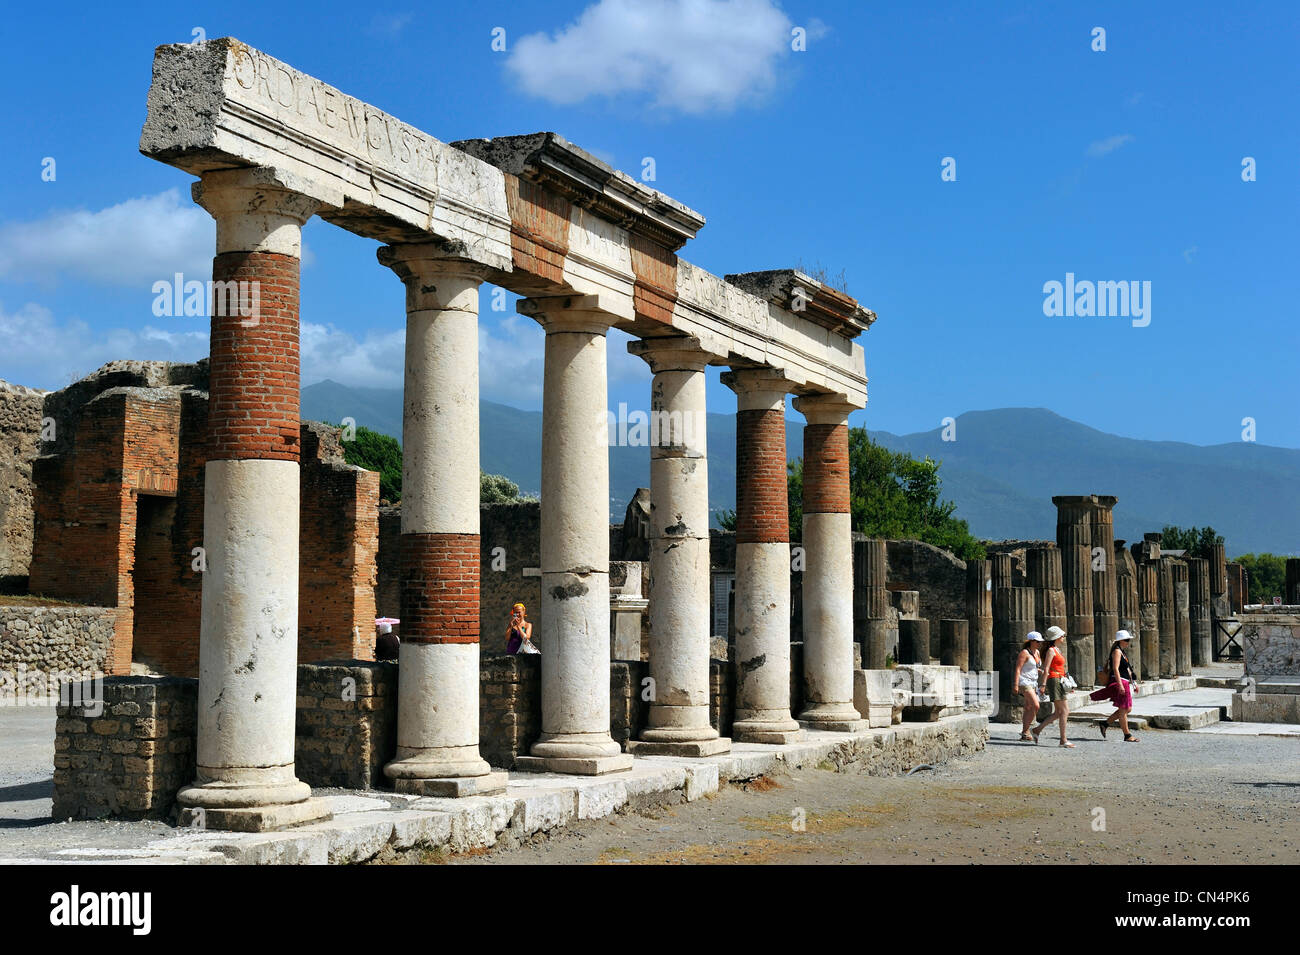 Italy, Campania, Pompei, archeological site listed as World Heritage by UNESCO, the Forum Stock Photo